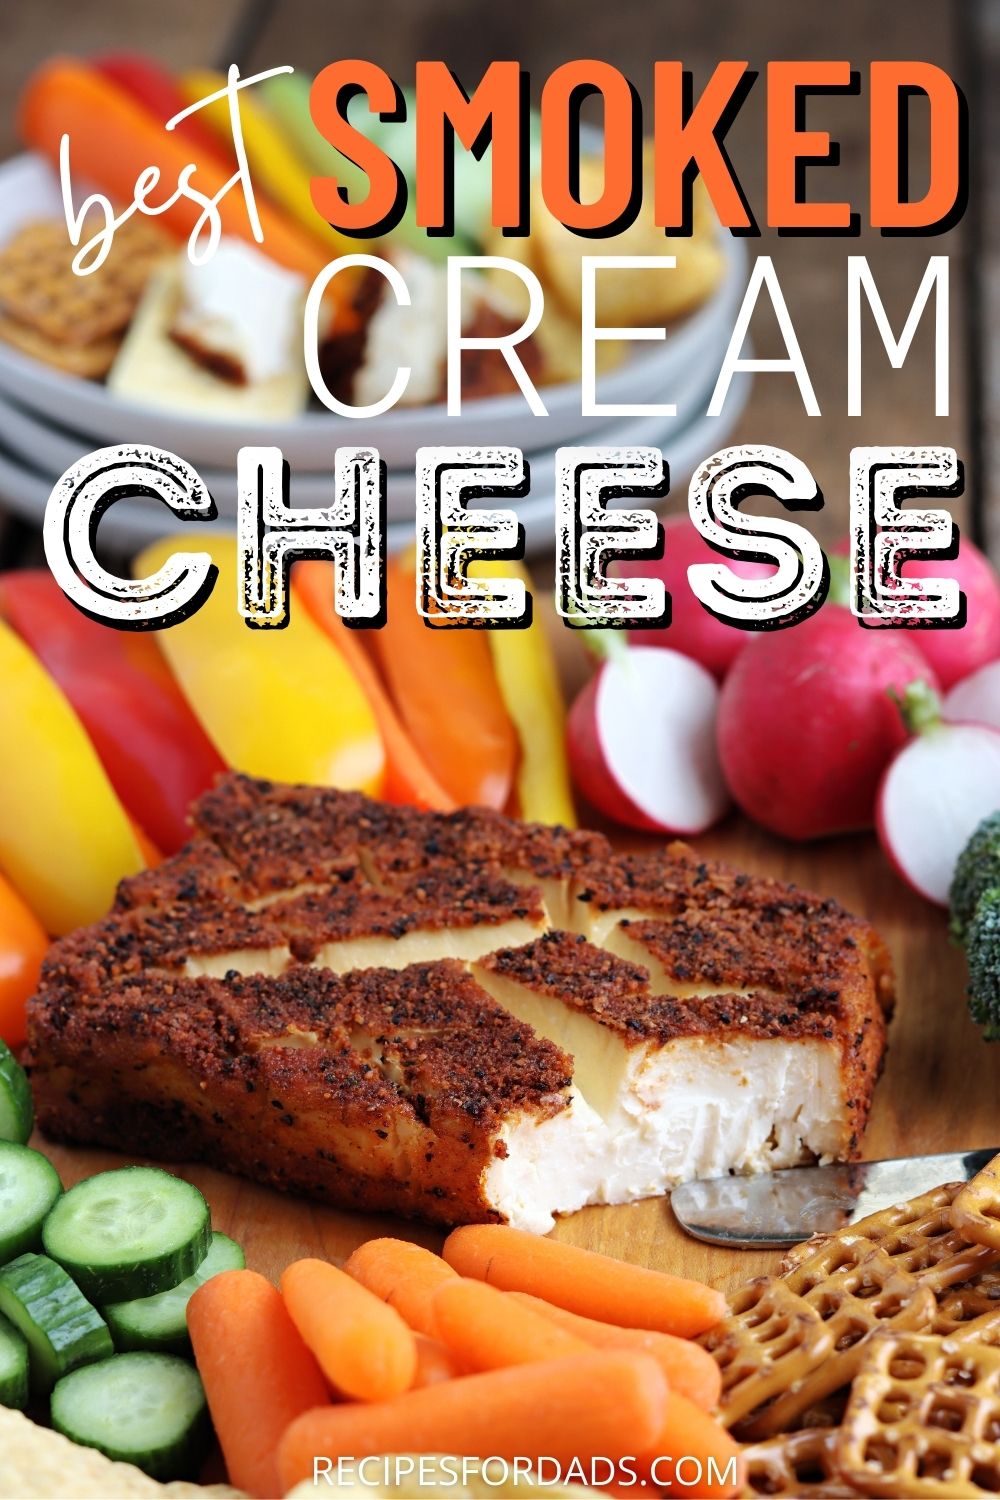 Smoked cream cheese served with crackers, veggies and pretzels | Pin Graphic for Pinterest